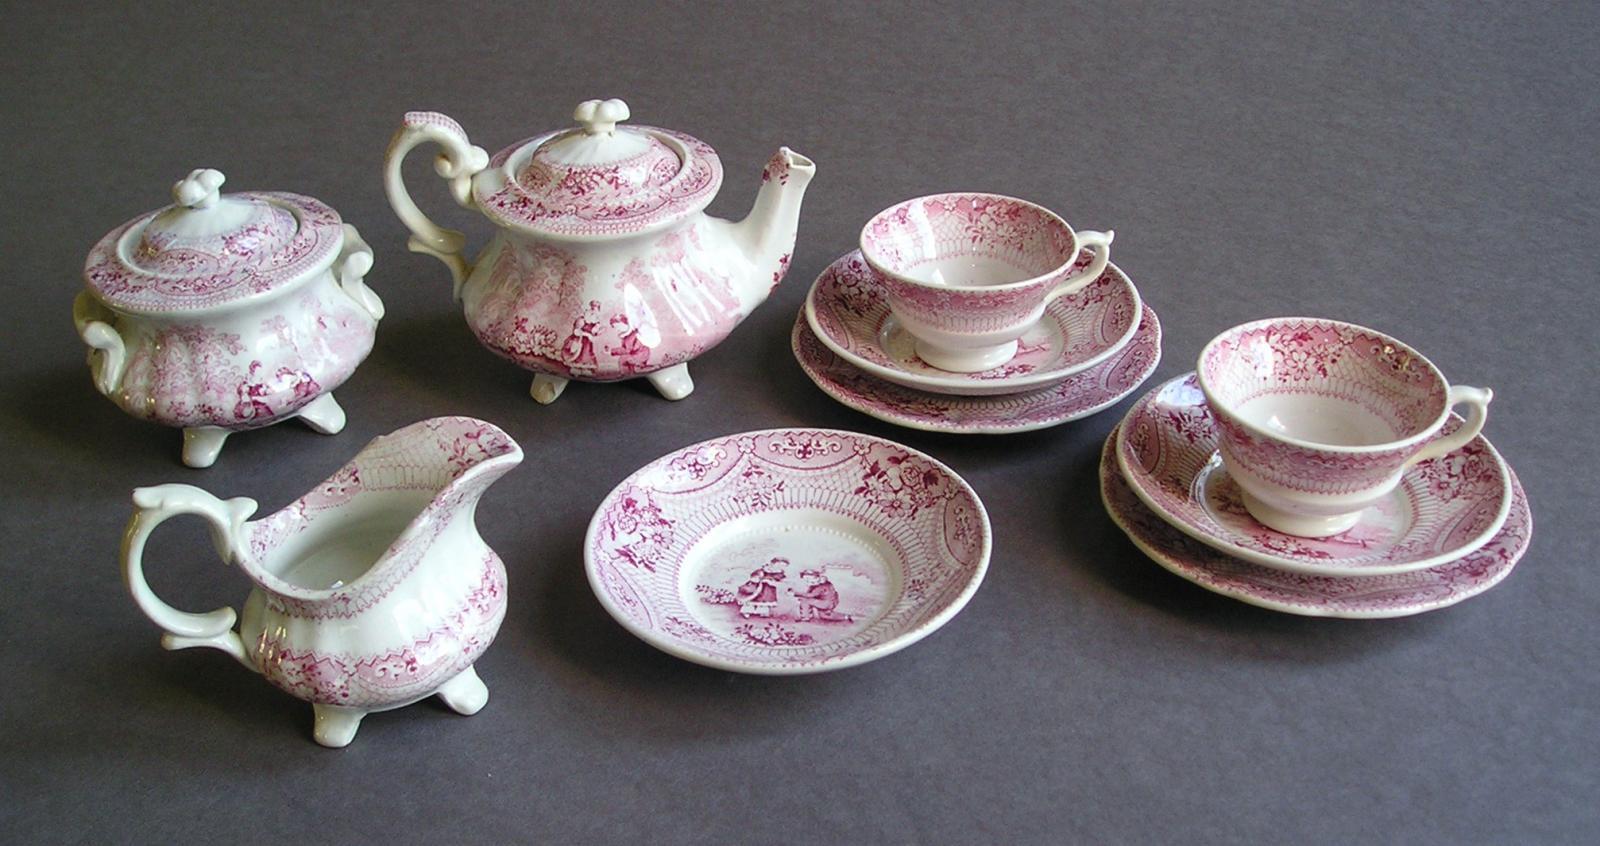 Pink and white child's china tea set, 1890s, children's literature research collection, Box number 30